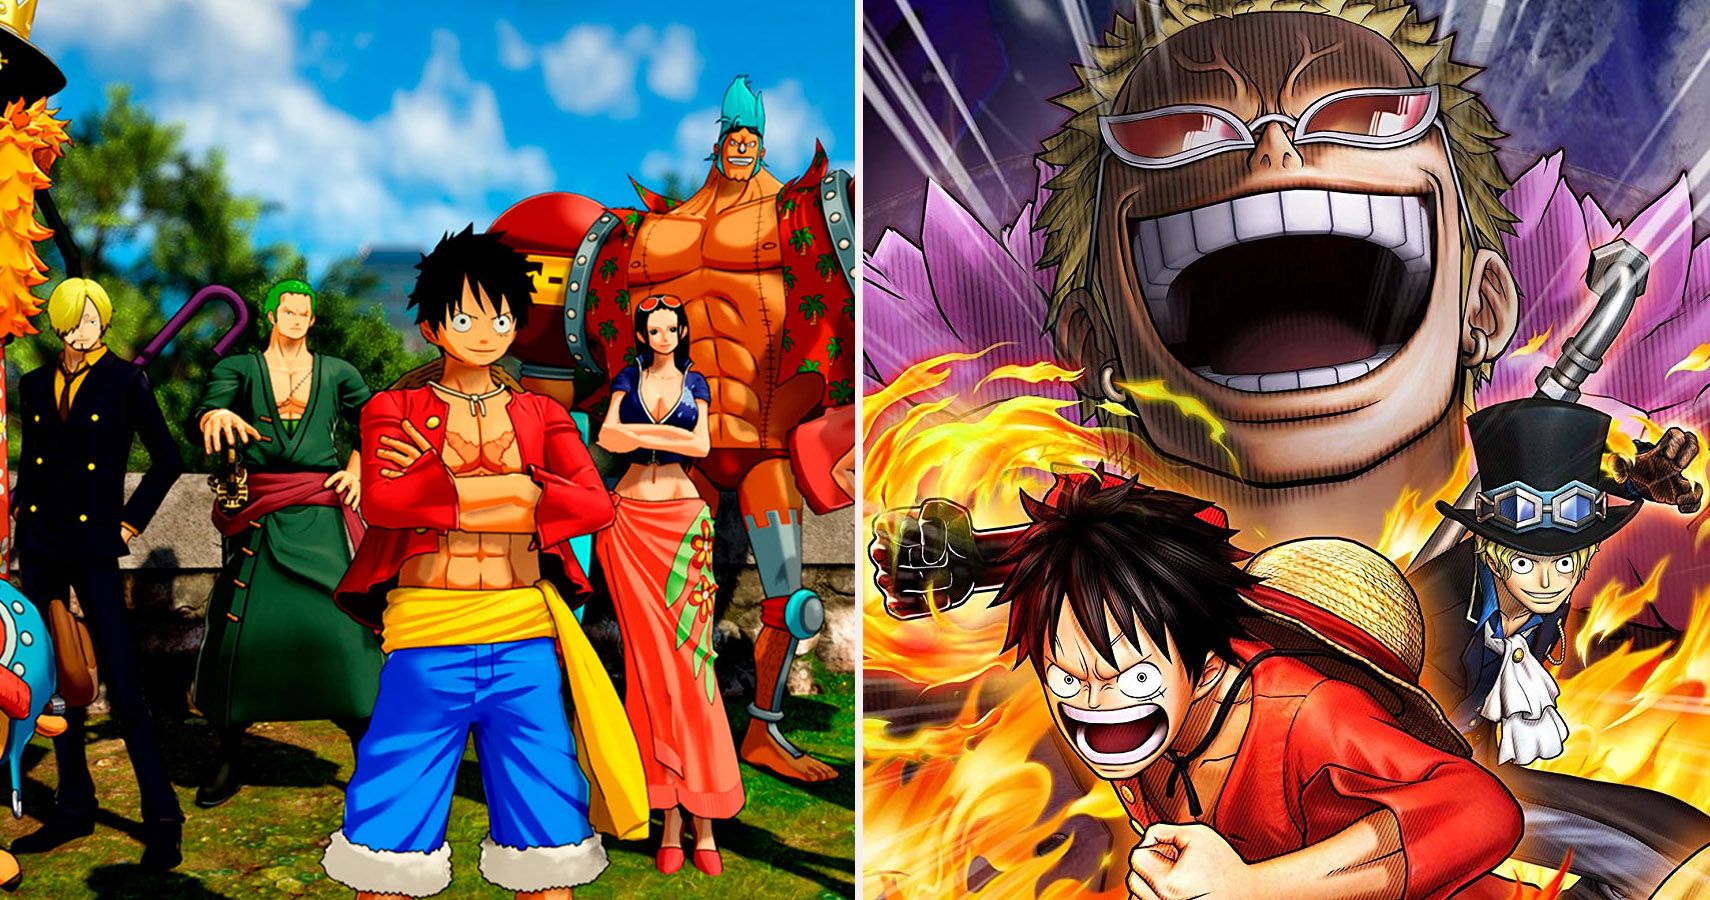 One Piece The 10 Best Games Based On The Anime Ranked According To Metacritic featured image